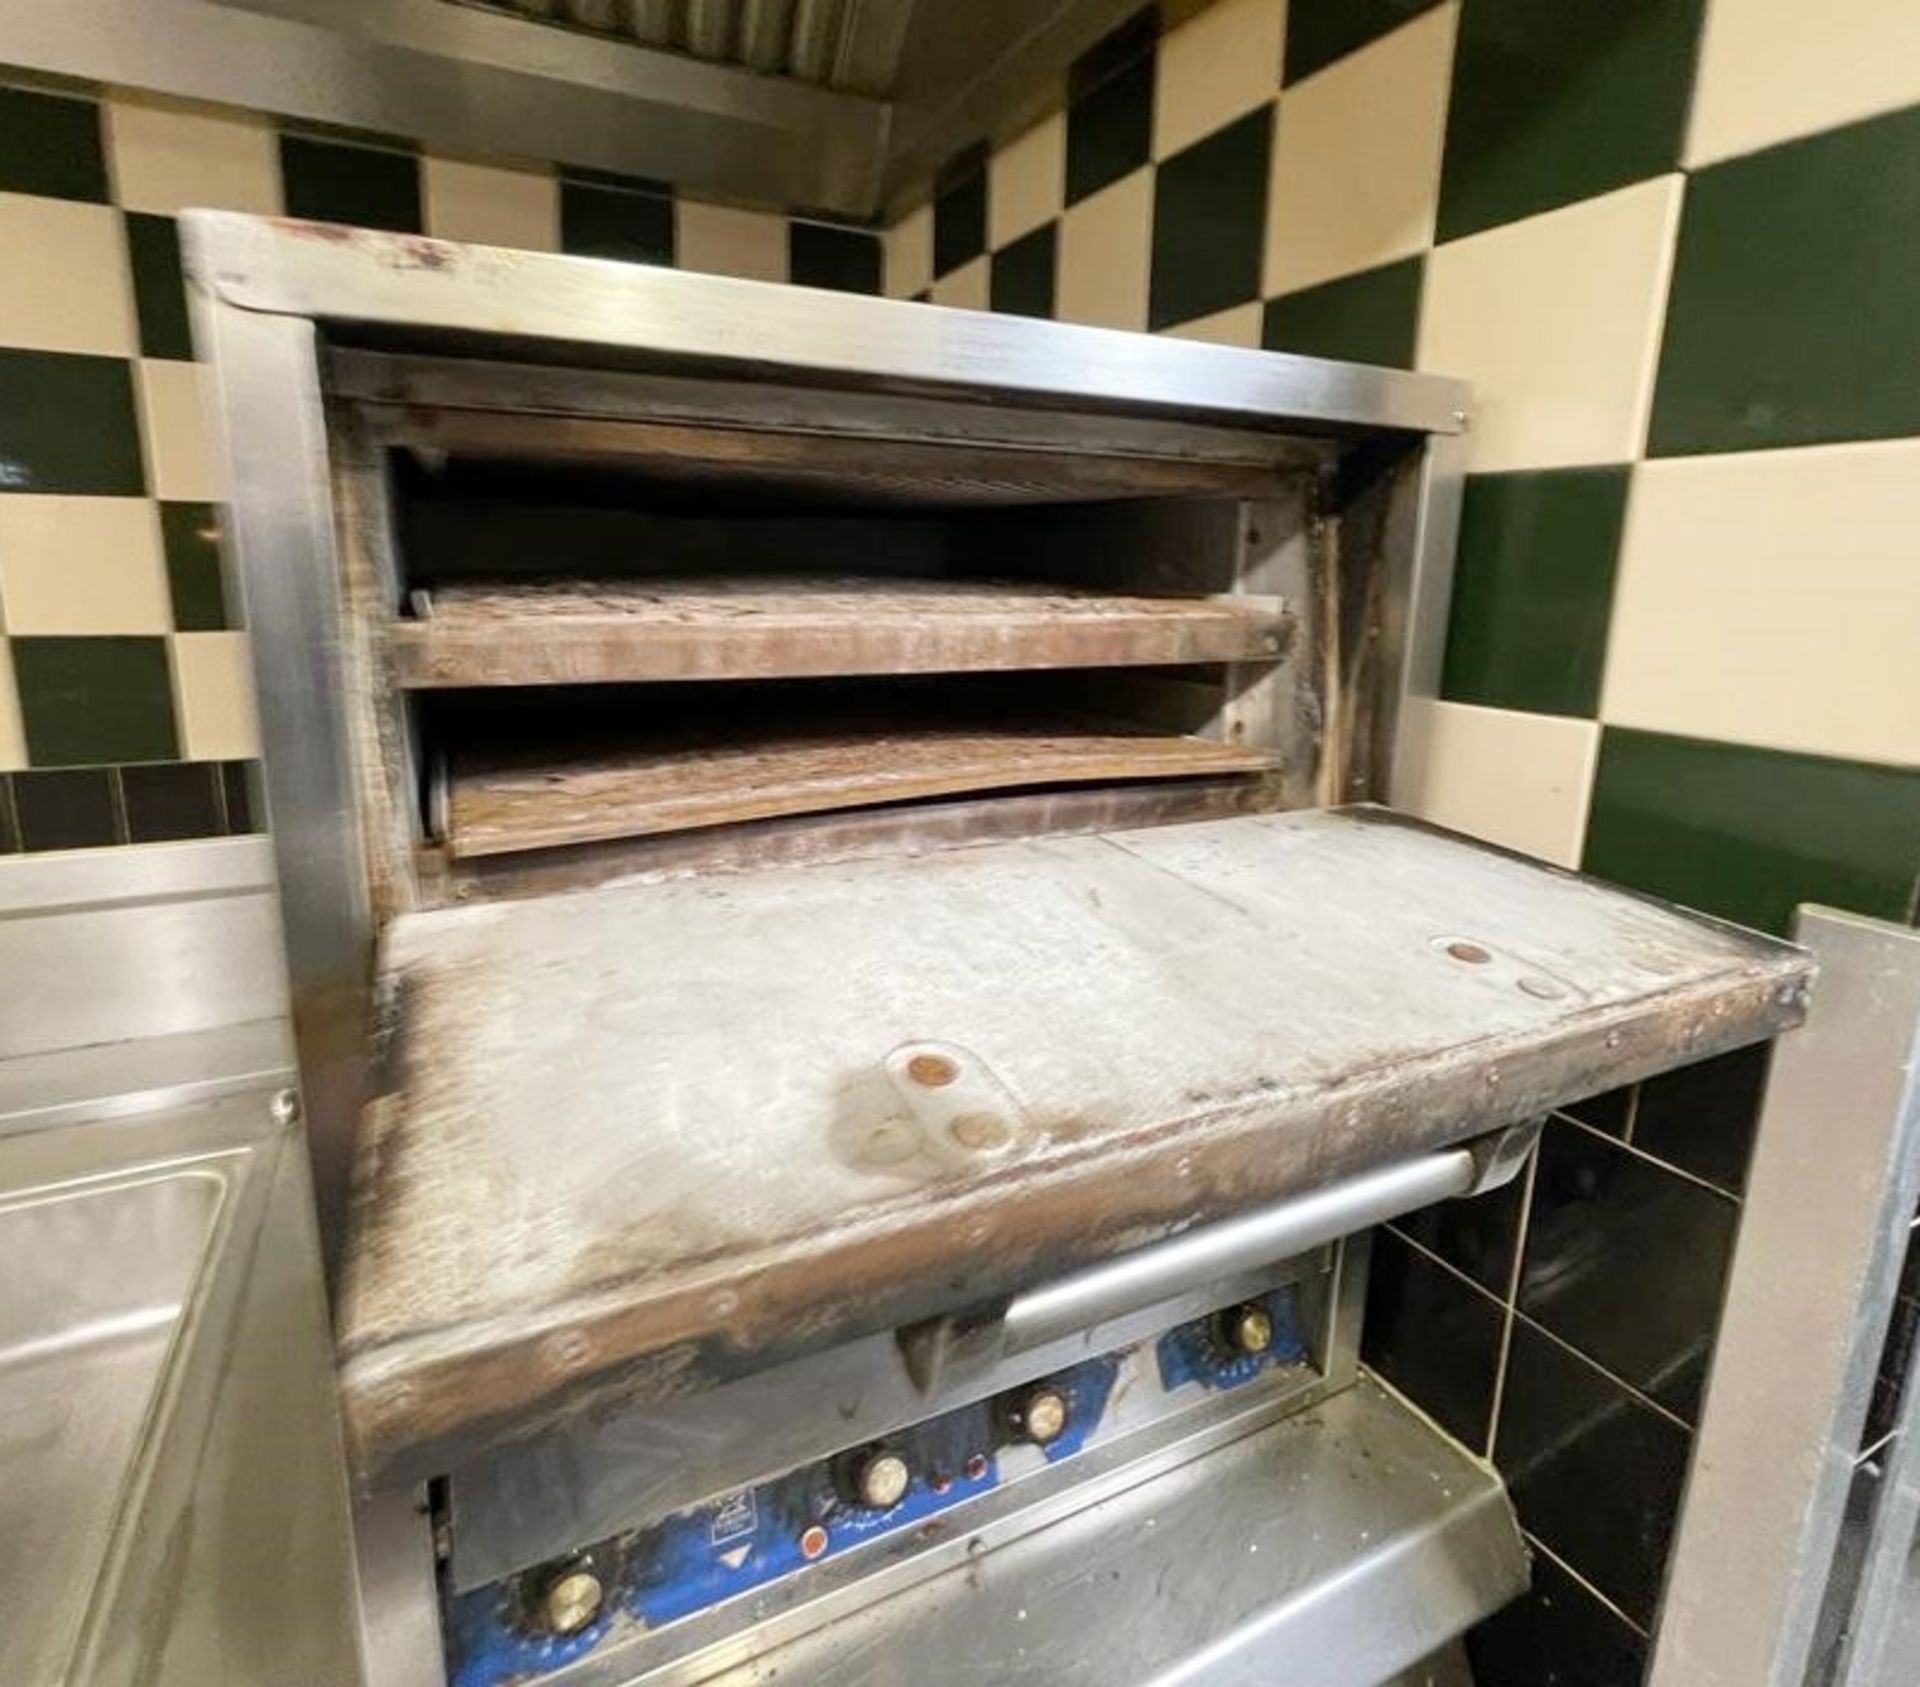 1 x Bakers Pride Three Deck Commercial Electric Pizza Oven - CL819 - Location: Altrincham - Image 3 of 5